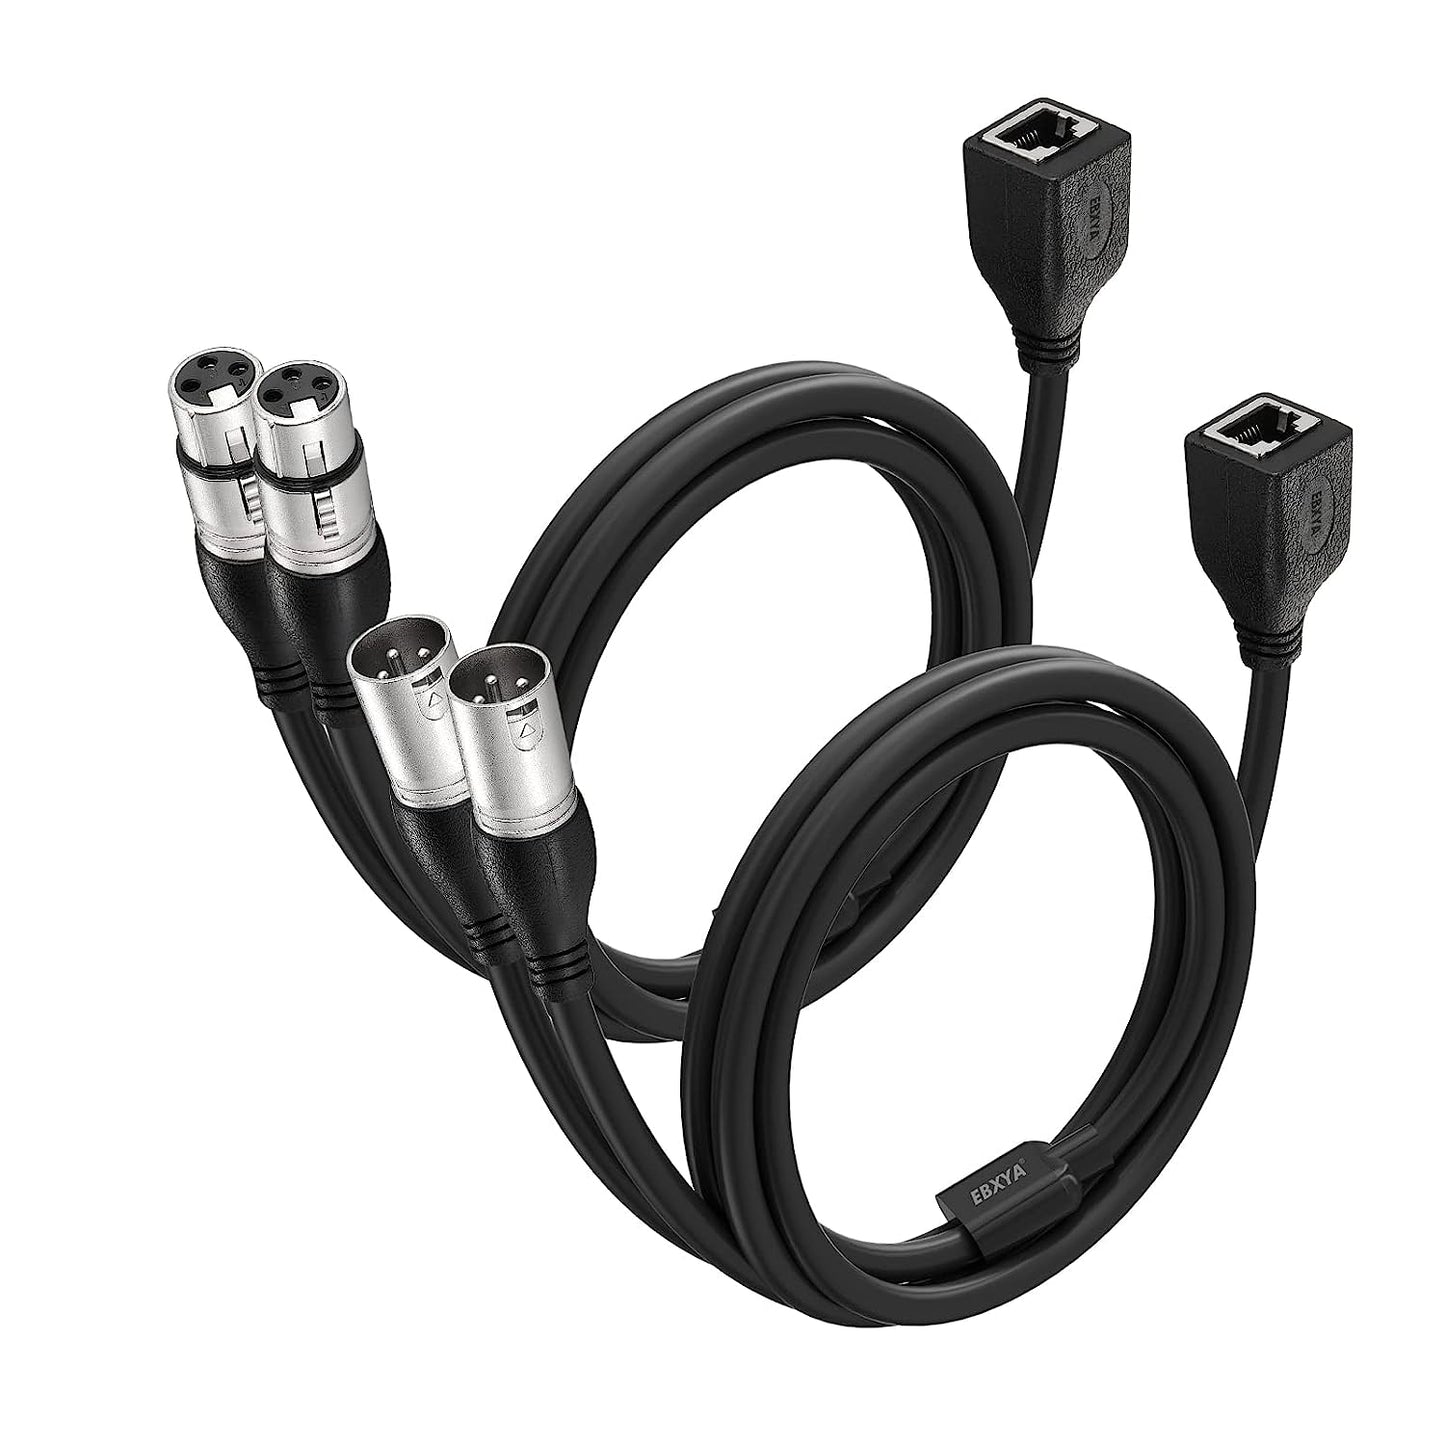 EBXYA XLR Cables, XLR Male to Female Balanced 3 Pin Metal Spring Microphone Cable Compatible with Mixers, Speakers, Amplifiers, Mic